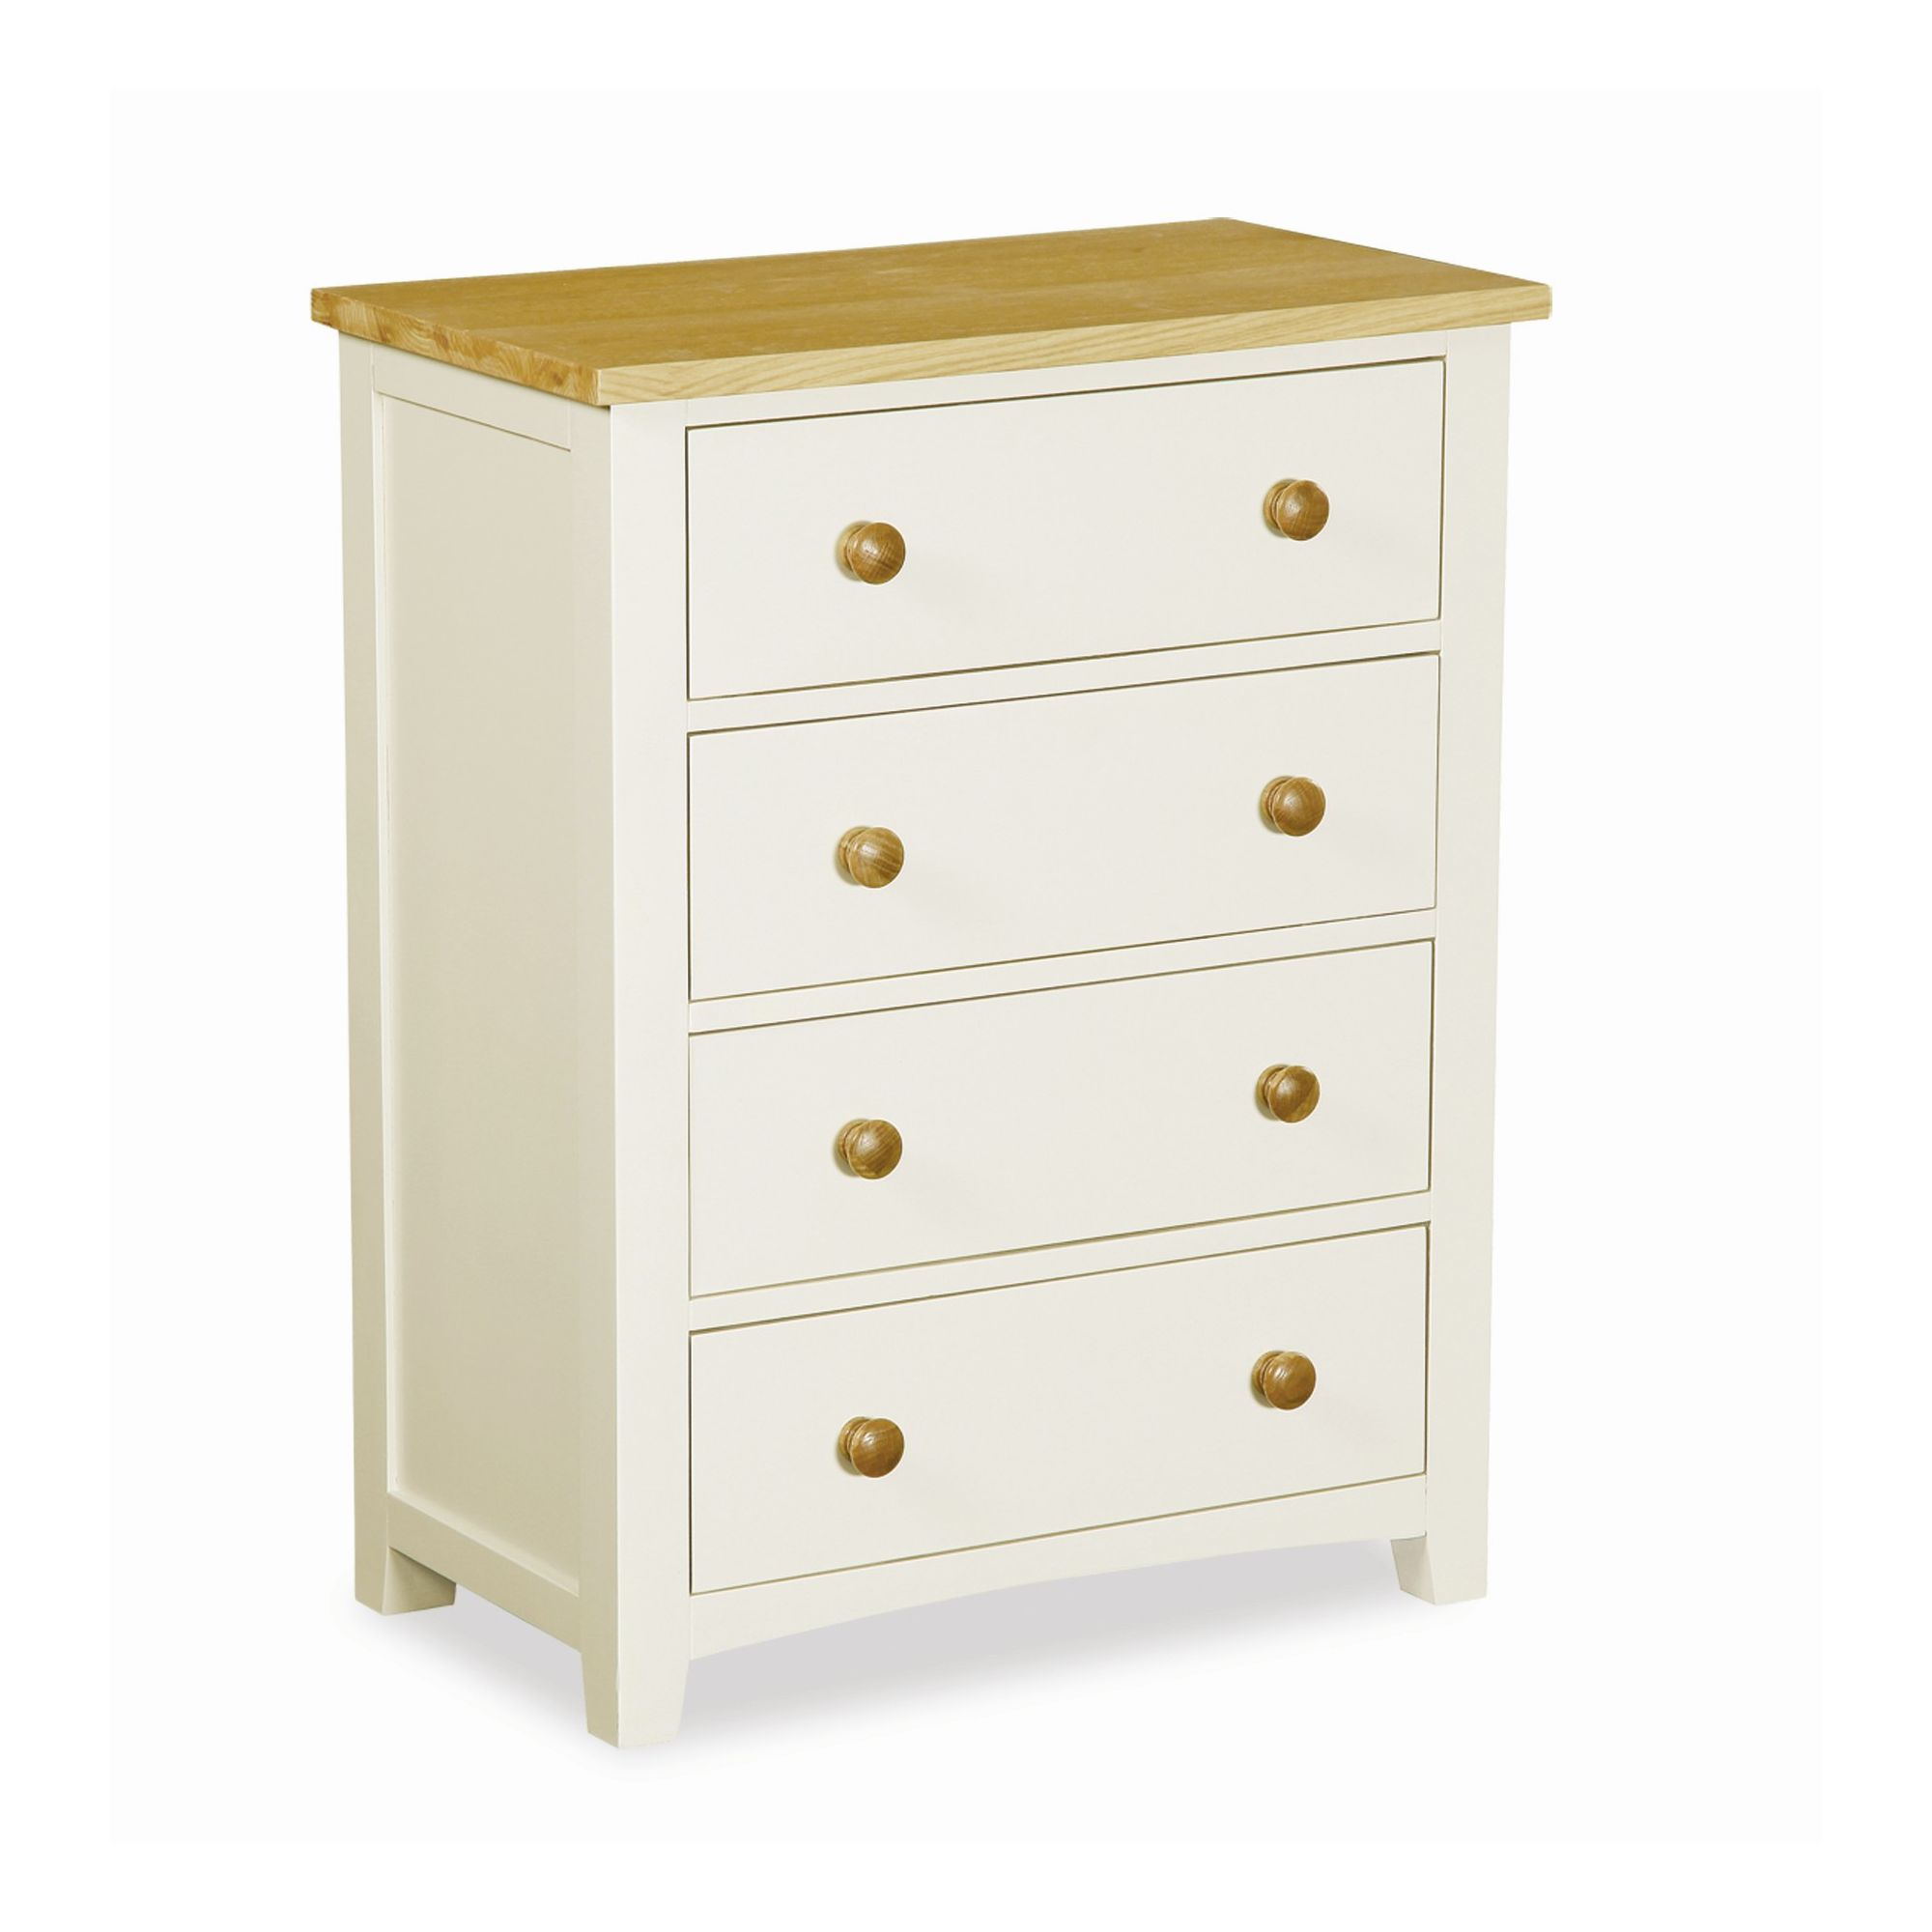 Alterton Furniture St. Ives 4 Drawer Chest at Tesco Direct